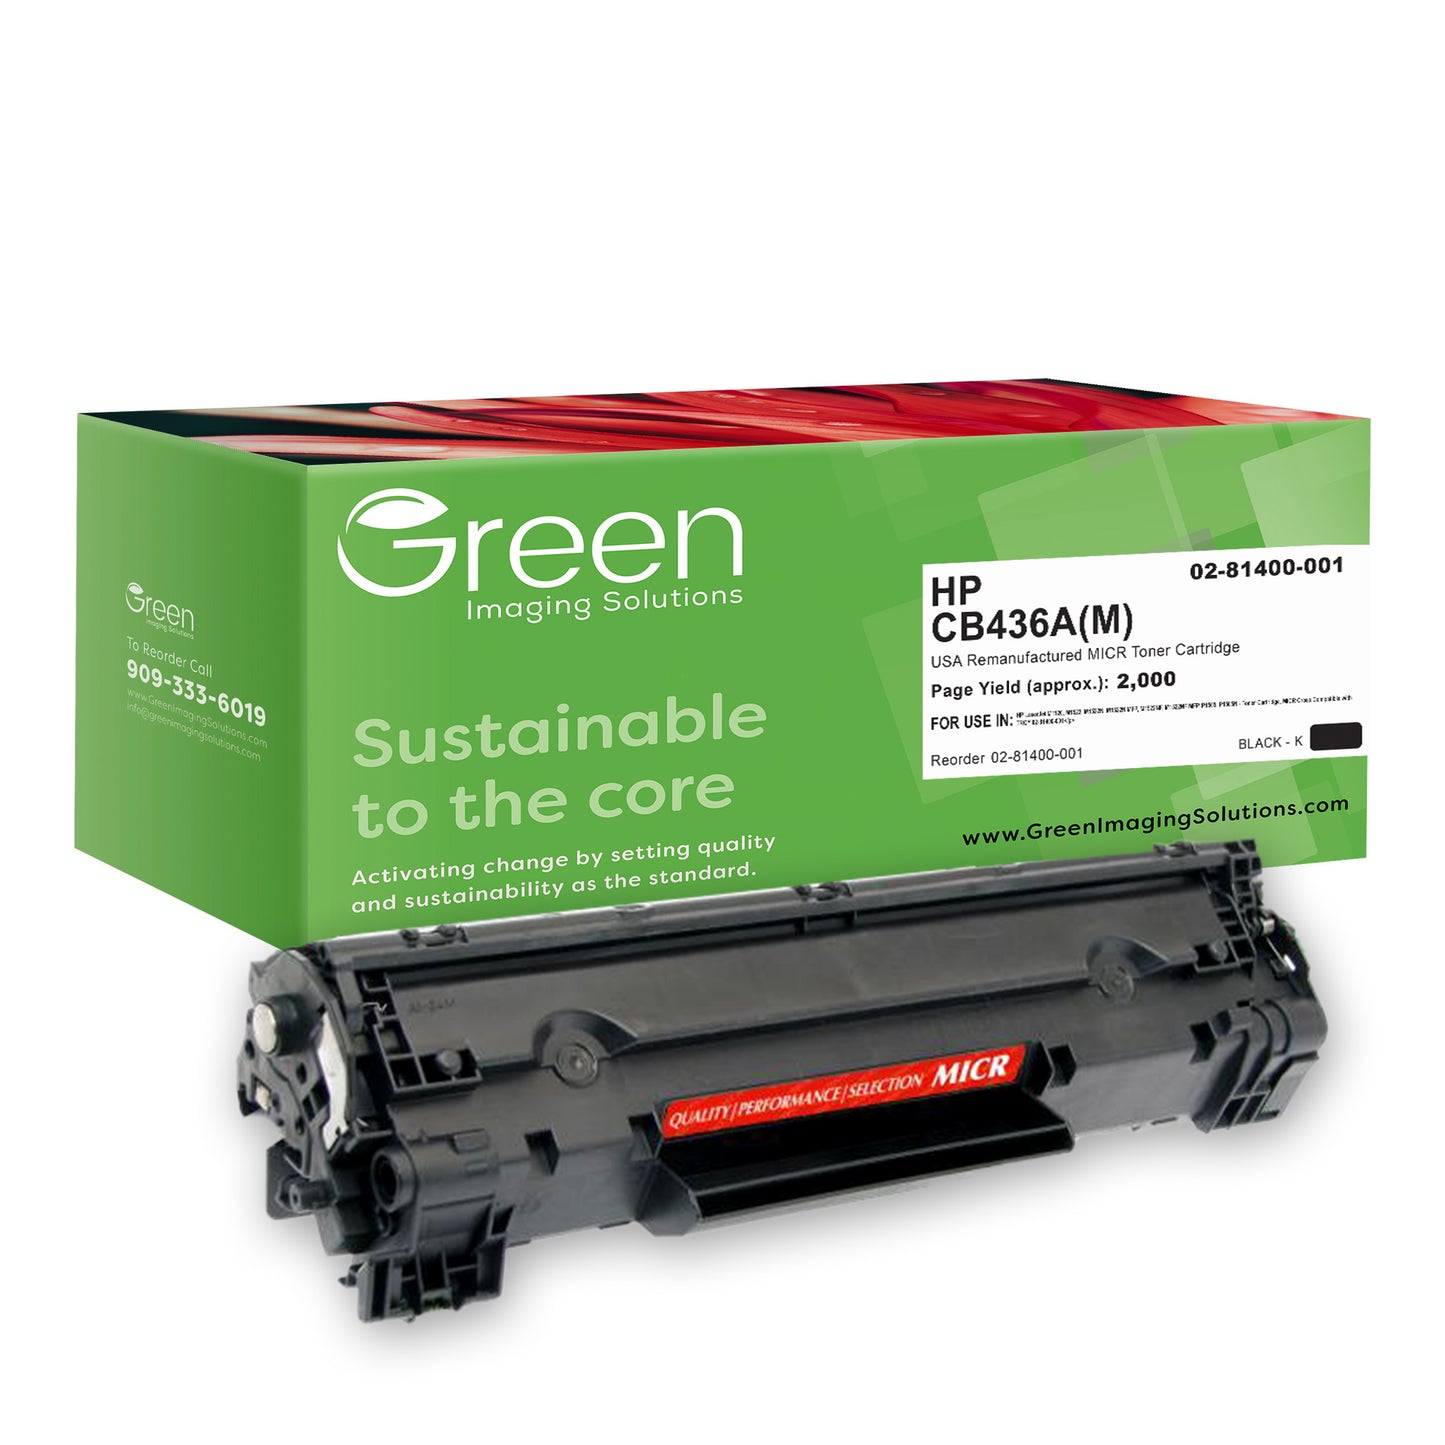 GIS USA Remanufactured MICR Toner Cartridge for HP CB436A, TROY 02-81400-001